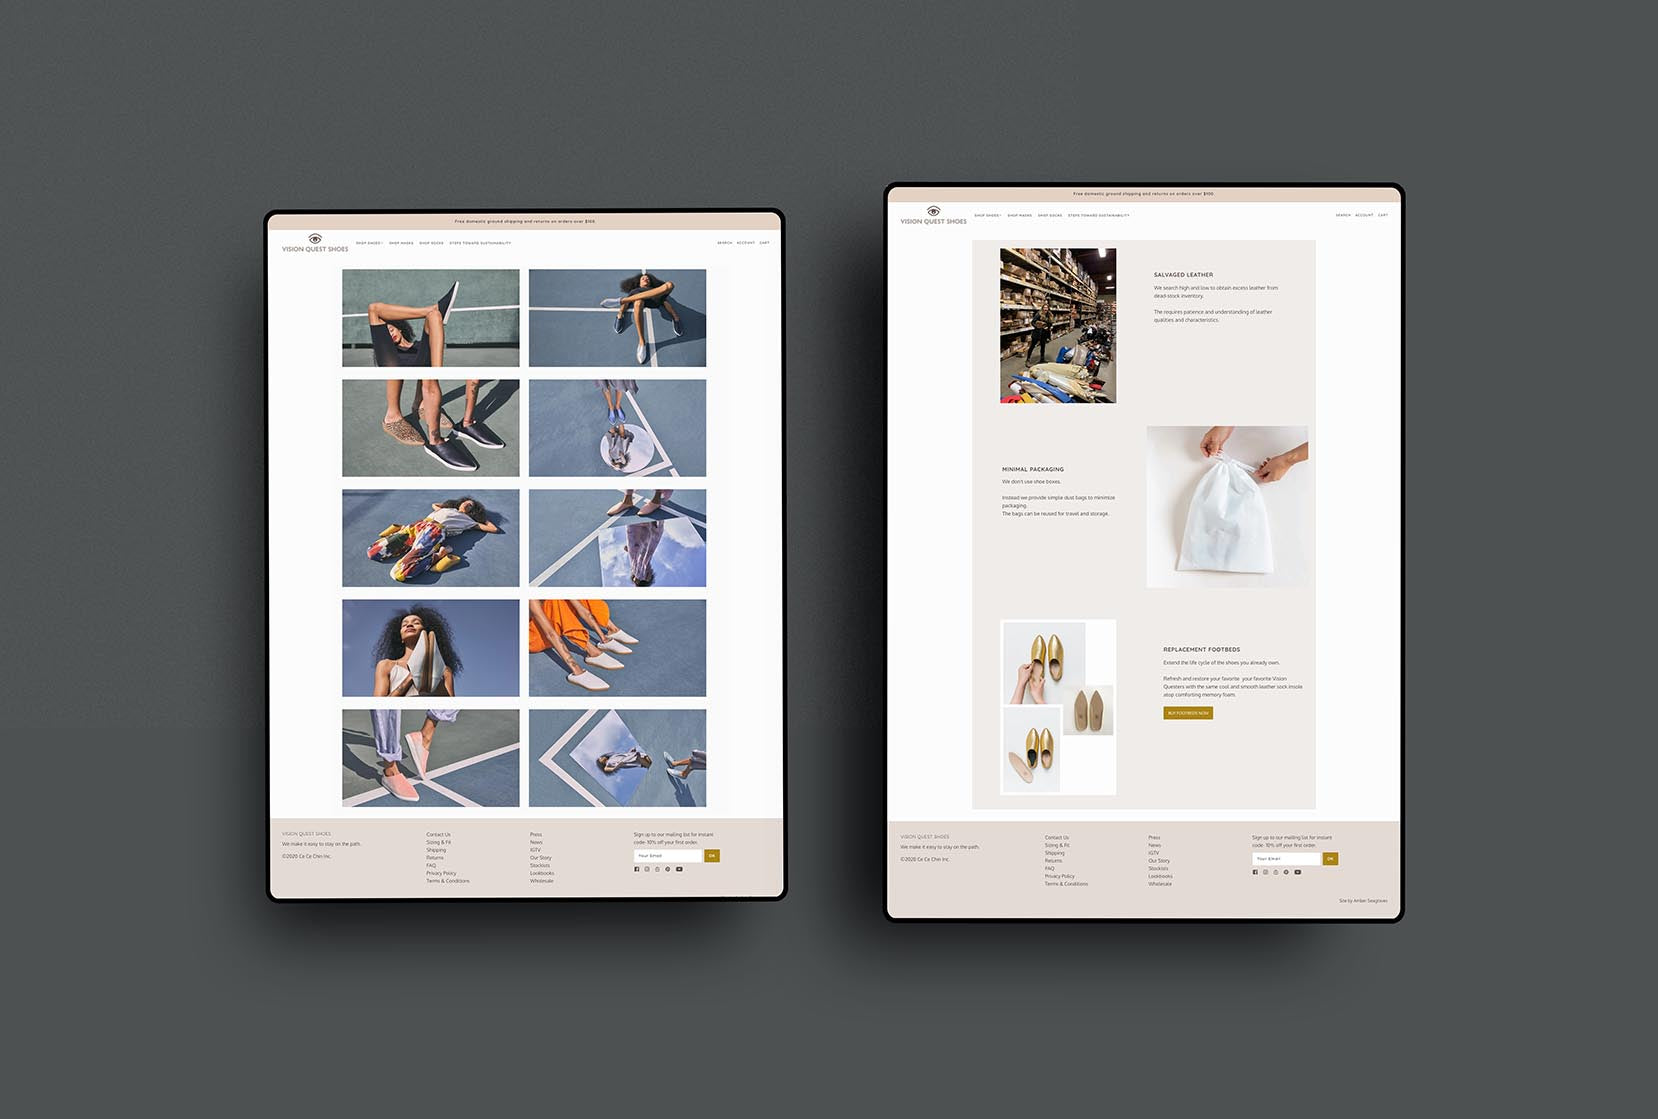 Vision Quest Shoes Shopify Ecommerce Website by Studio Seagraves Design Agency St. Louis Missouri Female owned Branding and Web Design